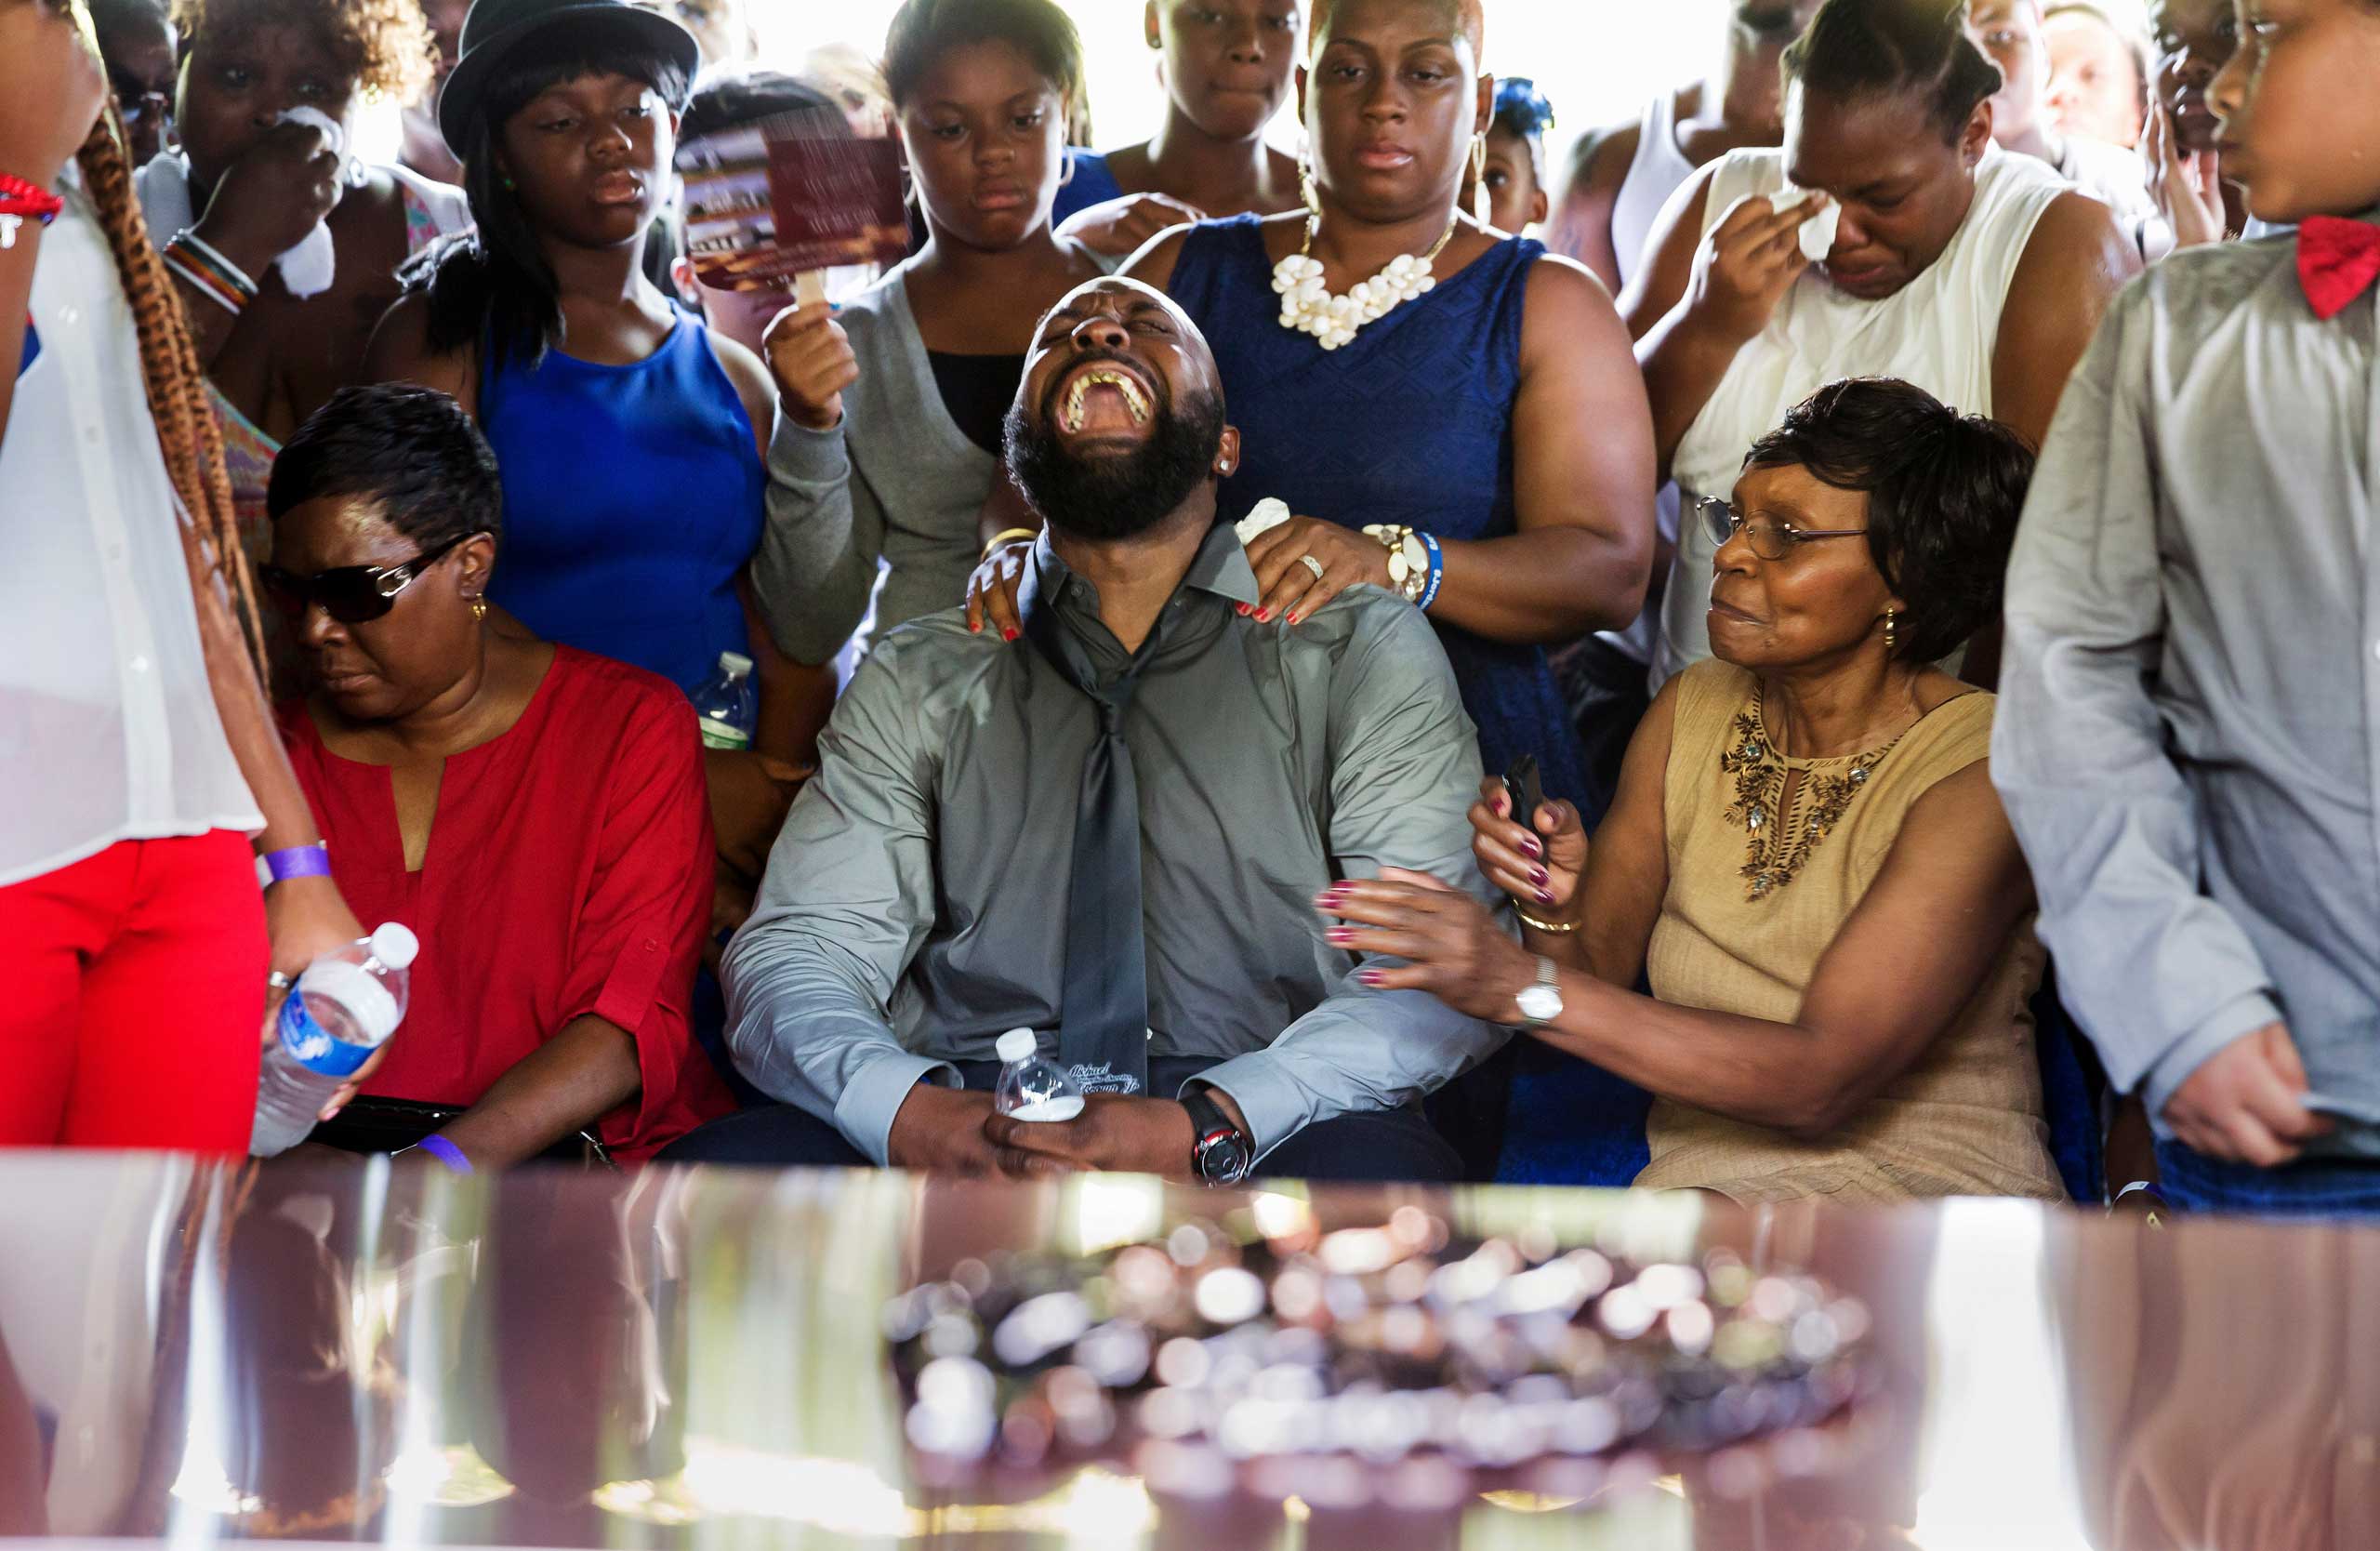 An anguished Michael Brown, Sr. yells as his son's casket is lowered into the ground at St. Peter's Cemetery in St. Louis, Mo., on Aug. 25, 2014.